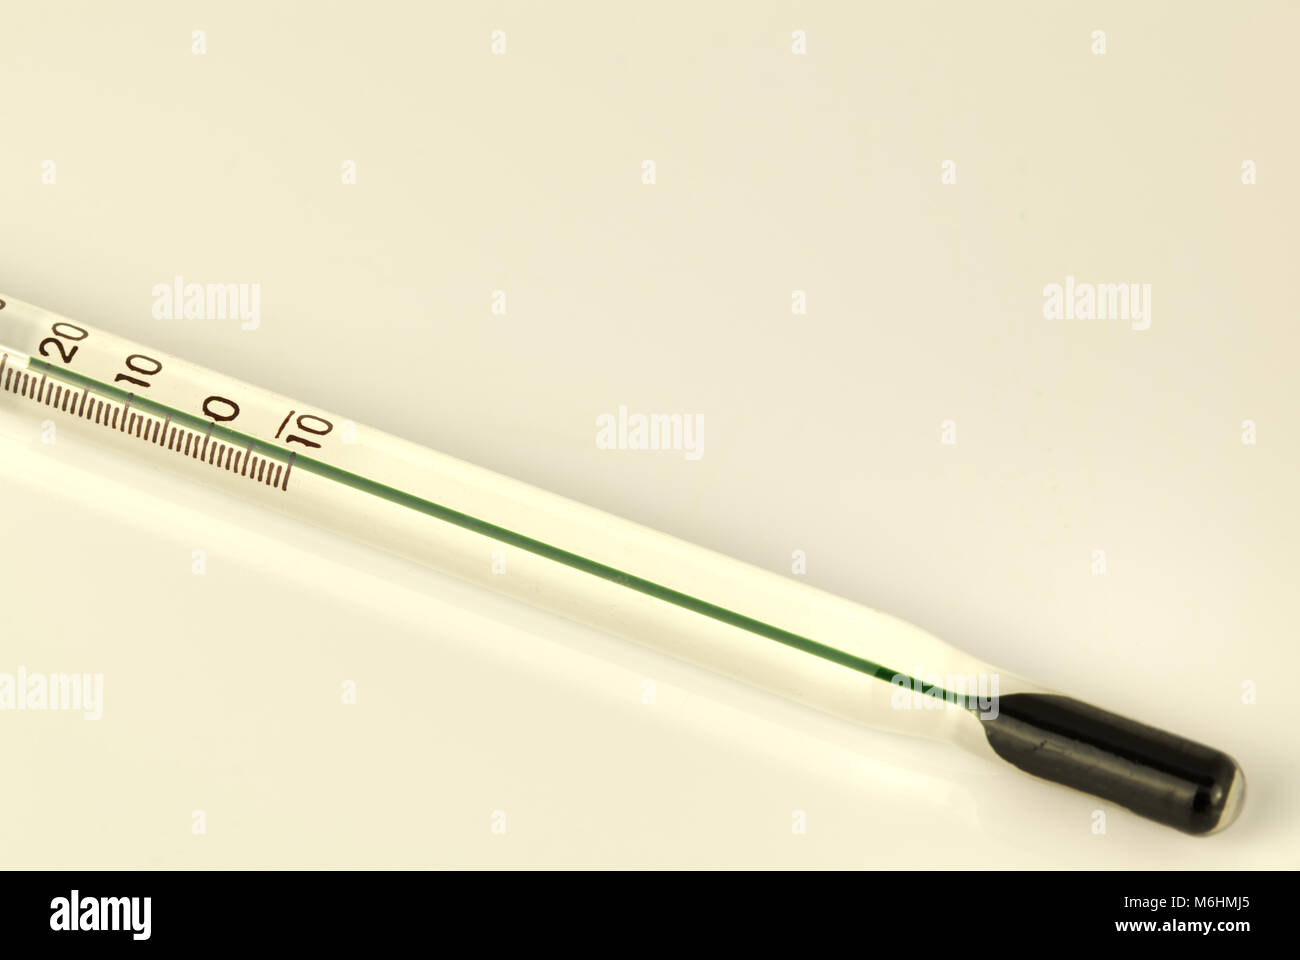 Green thermometer isolated on a white background. Scientific medical measuring device Stock Photo